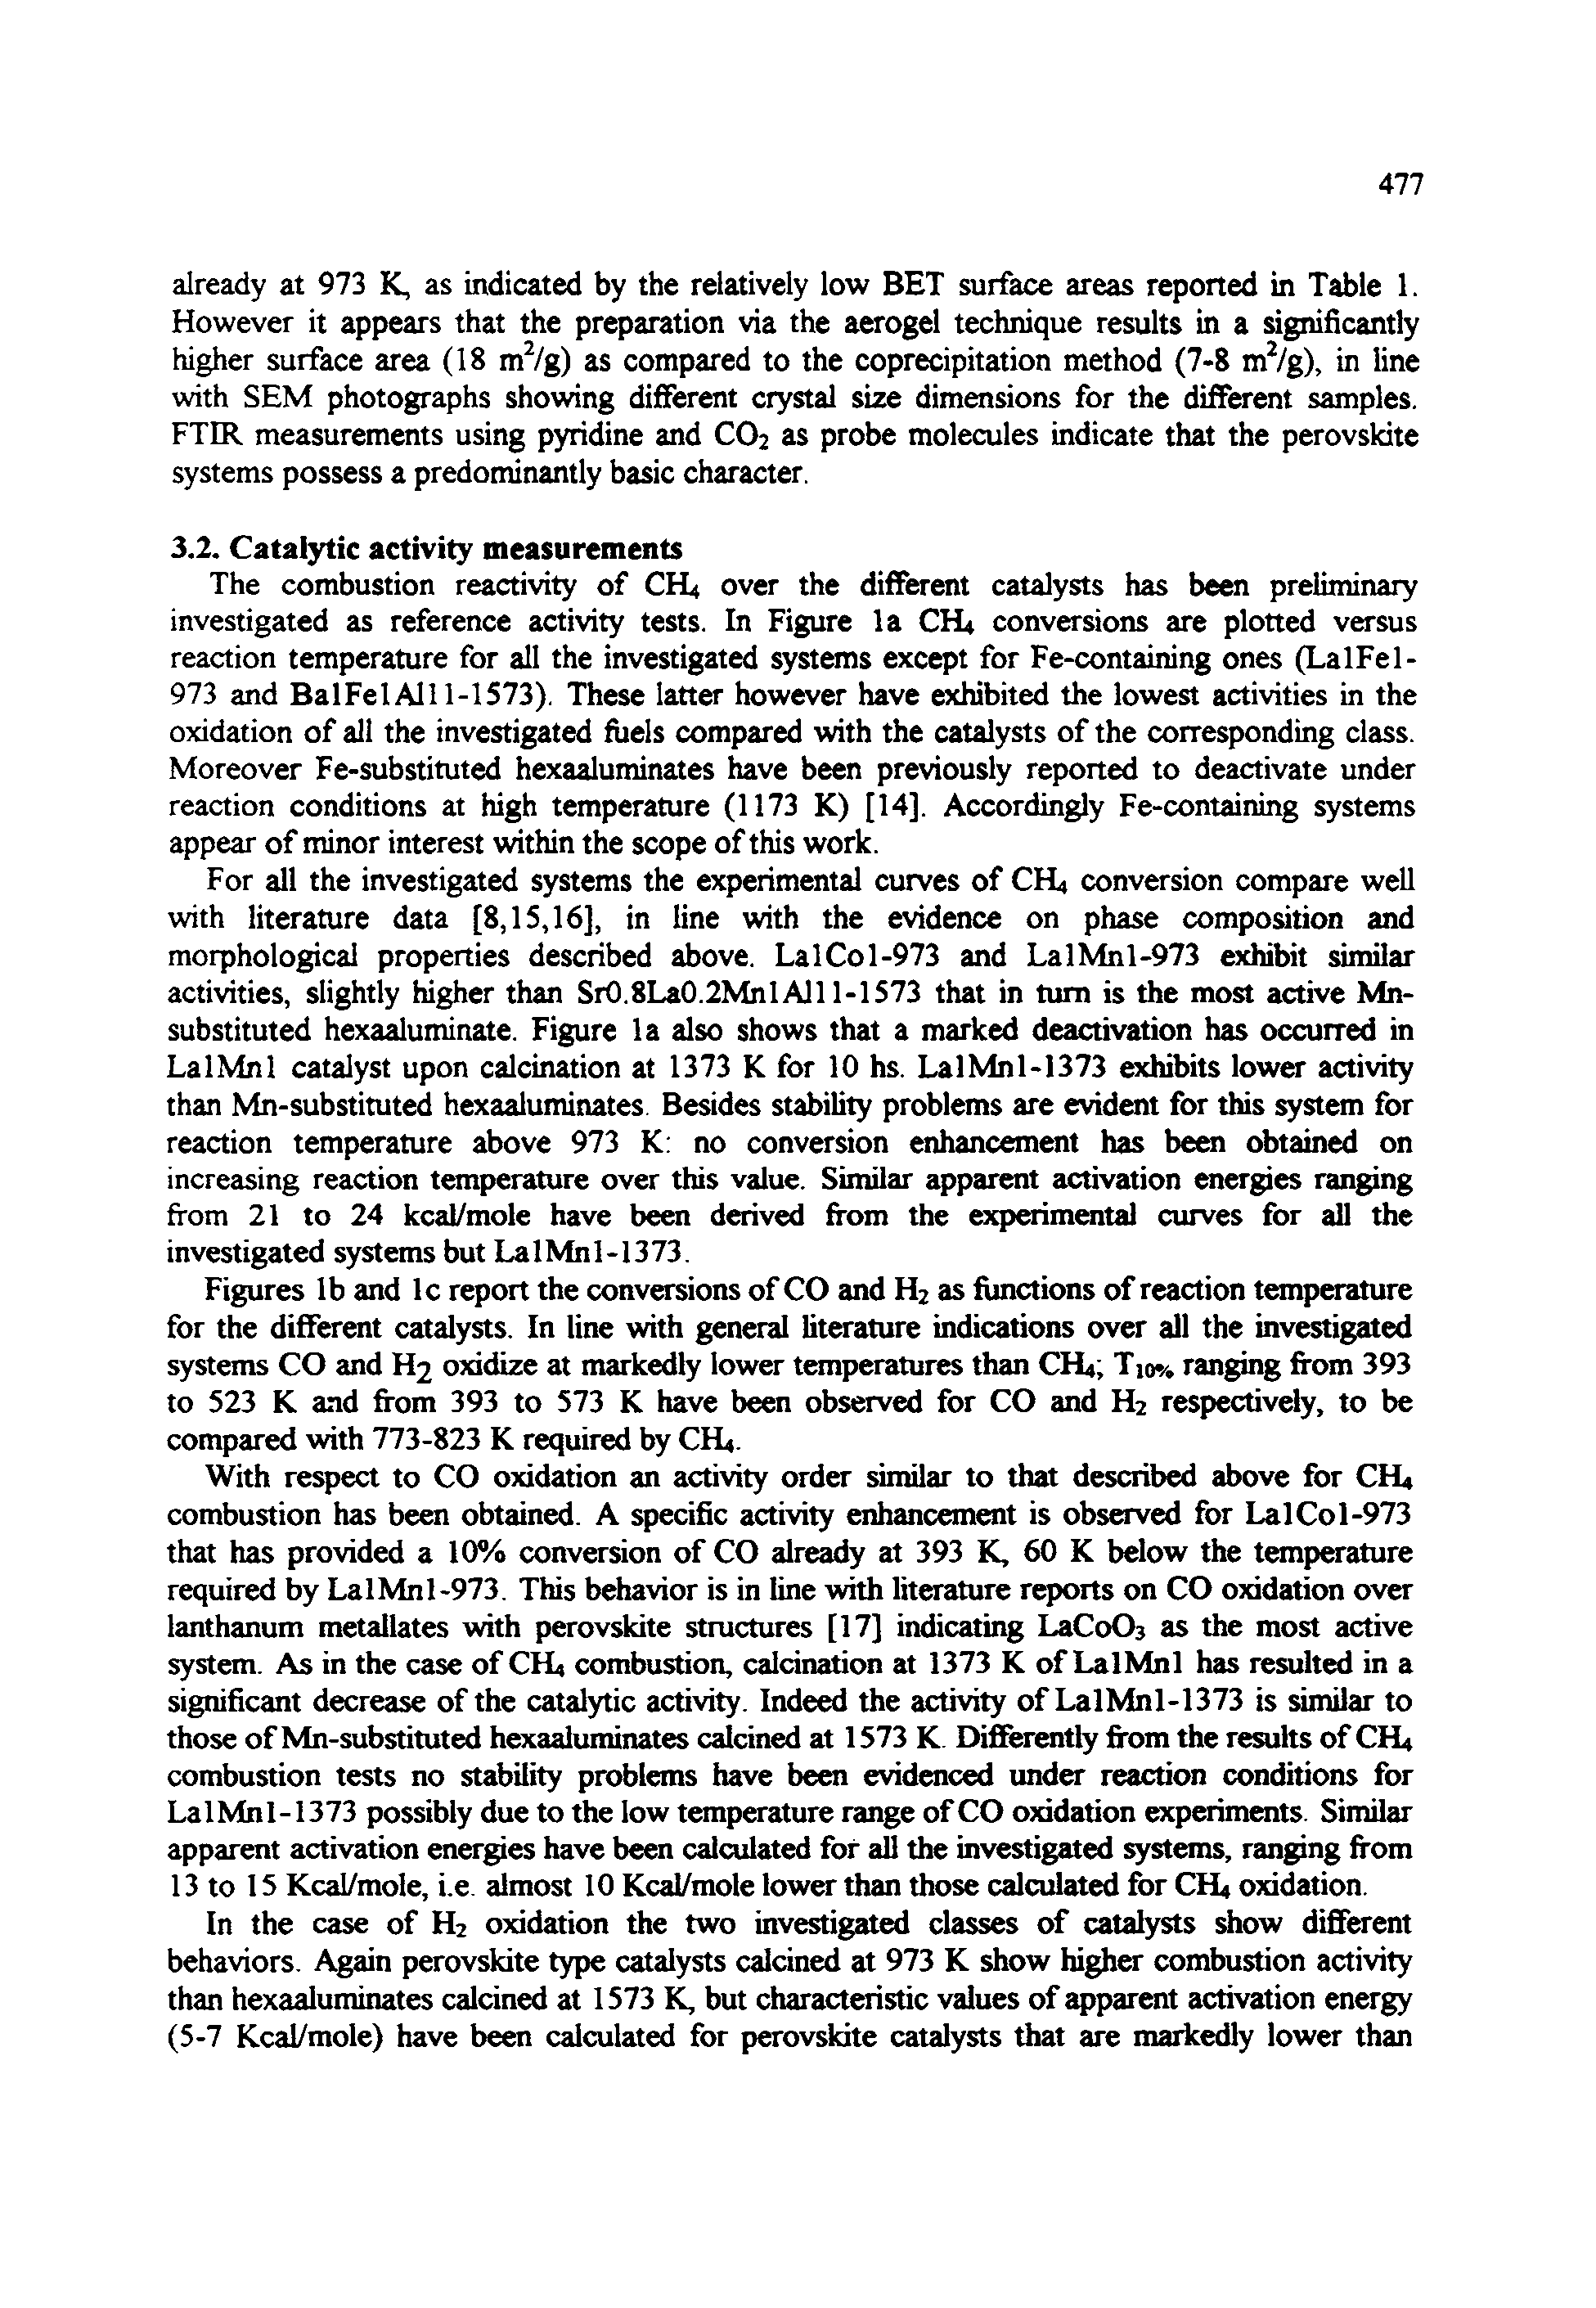 Figures lb and Ic report the conversions of CO and H2 as functions of reaction temperature for the different catalysts. In line >vith general literature indications over all the investigated systems CO and H2 oxidize at markedly lower temperatures than CH4 Tio% ranging from 393 to 523 K and from 393 to 573 K have been observed for CO and H2 respectively, to be compared with 773-823 K required by CH4.